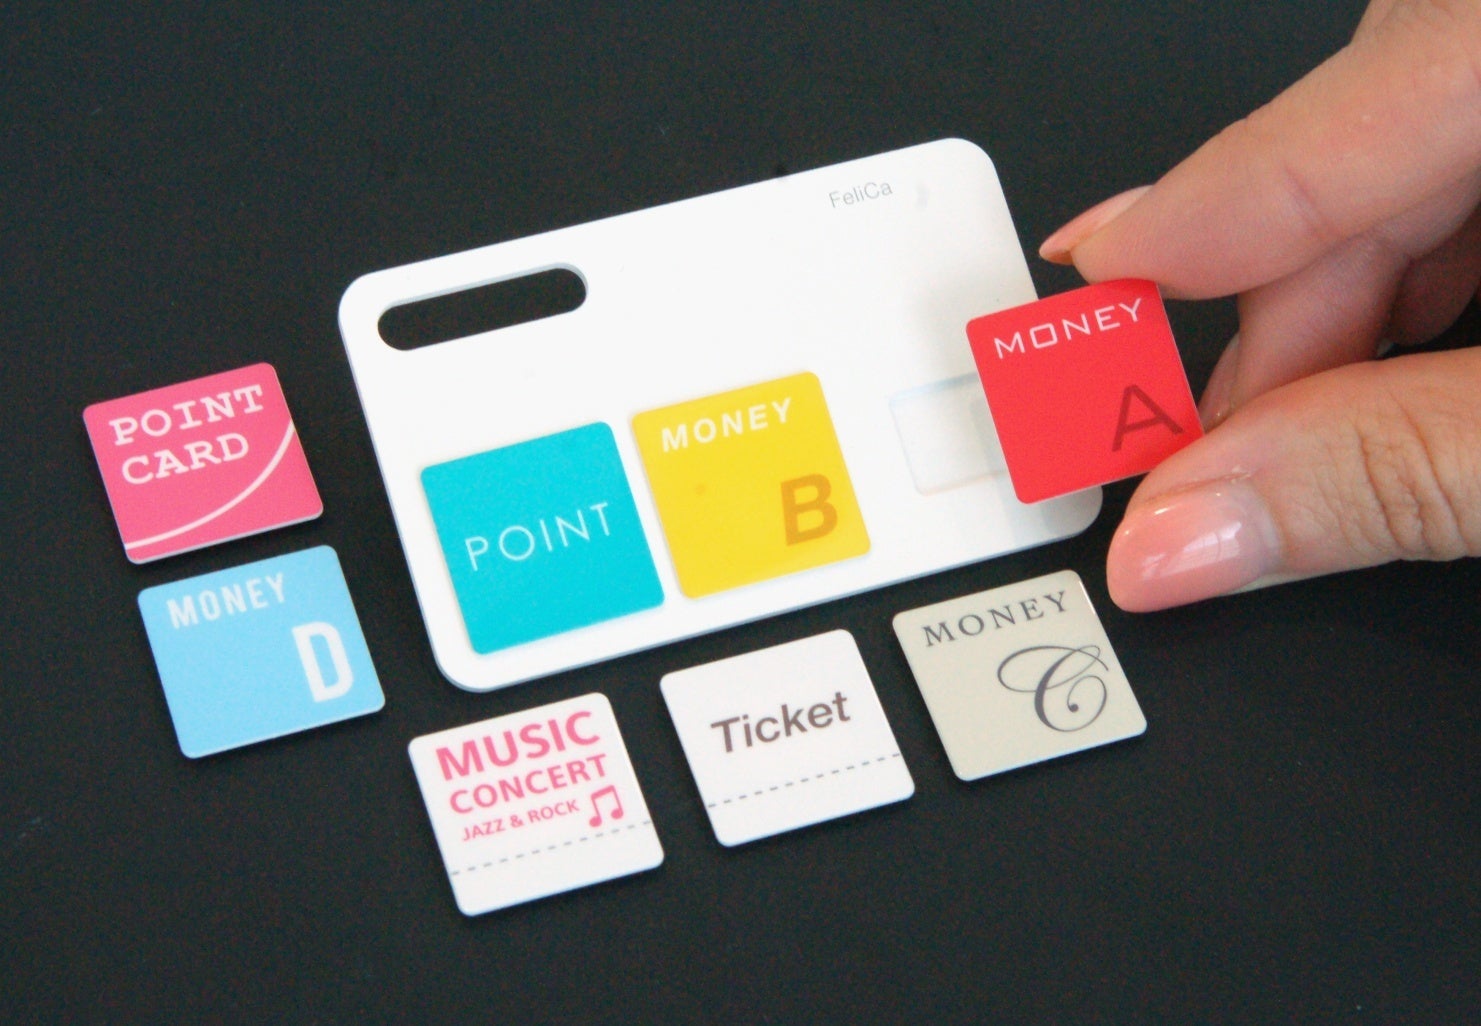 A FeliCa card with detachable payment modules - Upcoming iPhones will get chip to let Japanese citizens pay for mass-transit rides